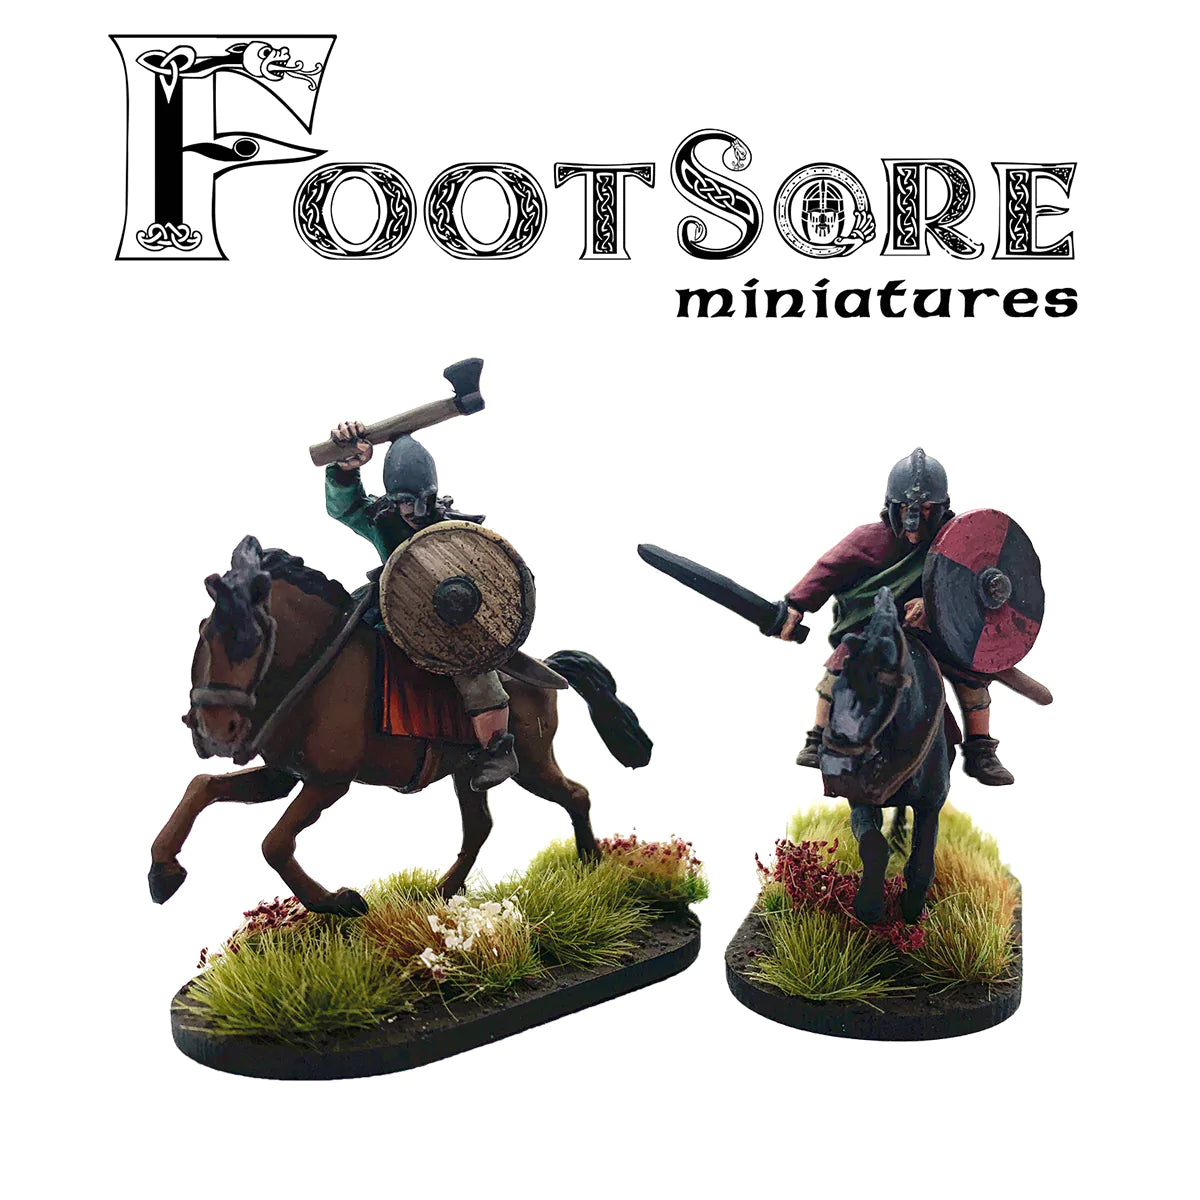 Welsh Medieval Cavalry: Footsore Miniatures